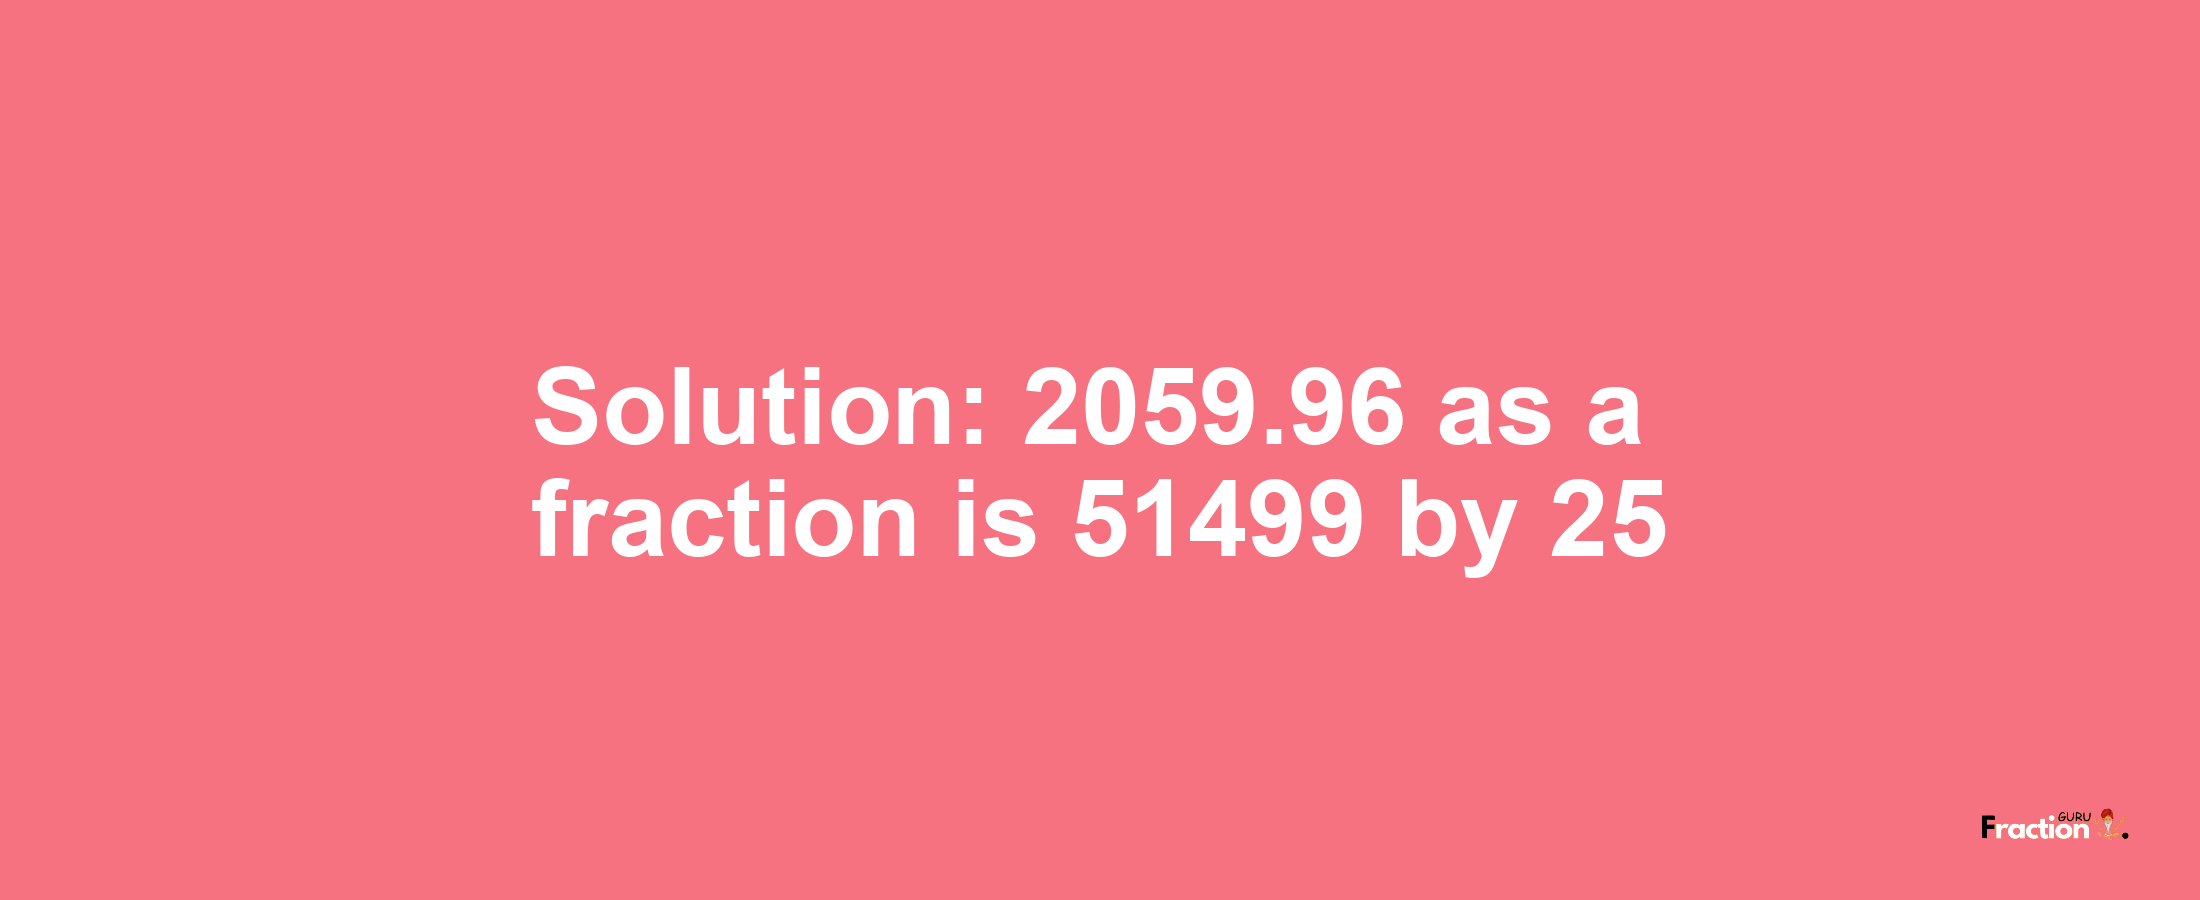 Solution:2059.96 as a fraction is 51499/25